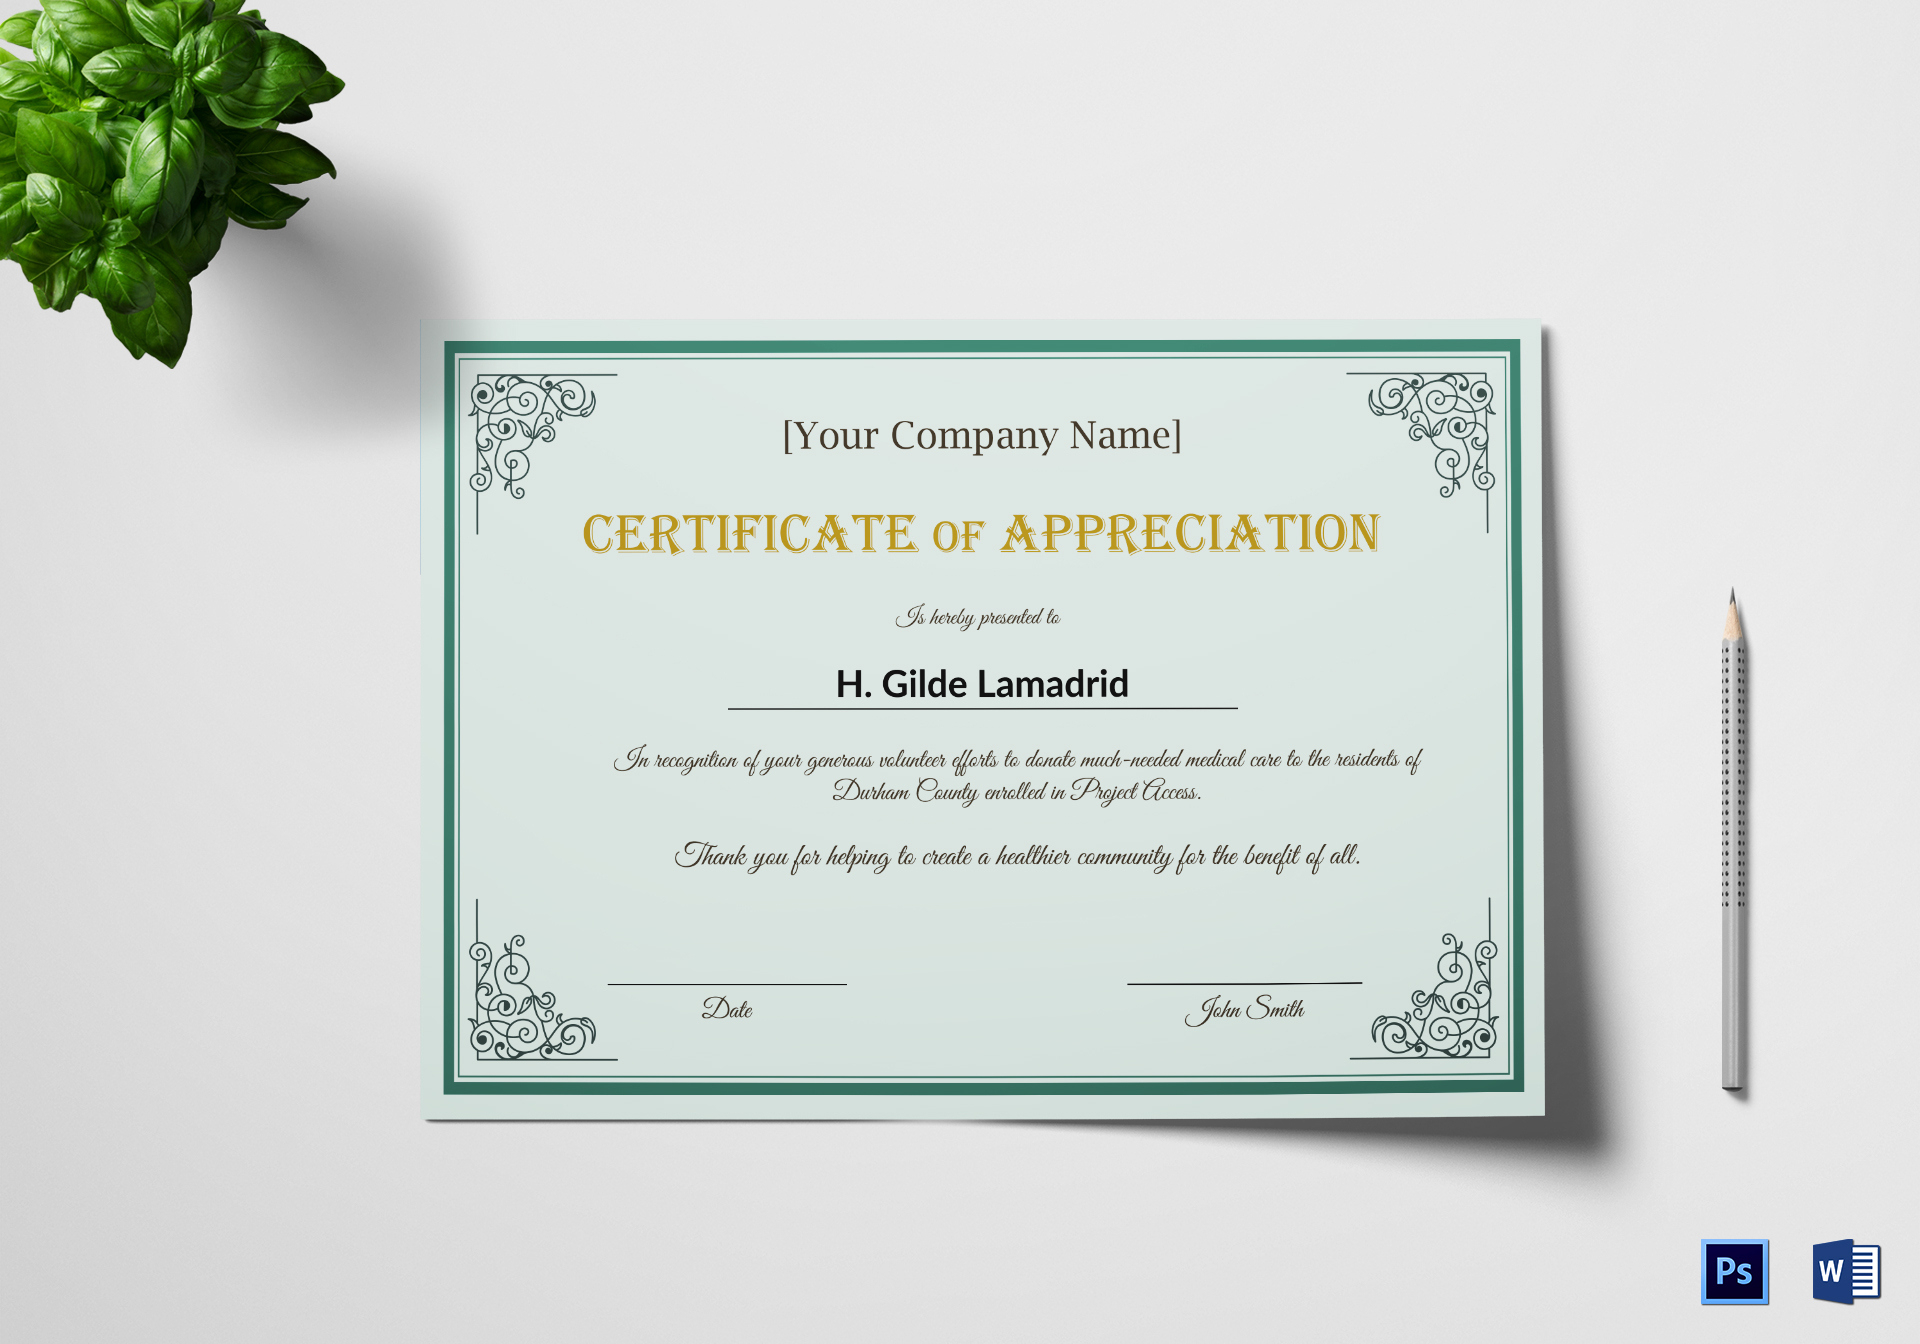 Company Employee Appreciation Certificate Design Template In Psd, Word pertaining to Certificate Of Recognition Template Word